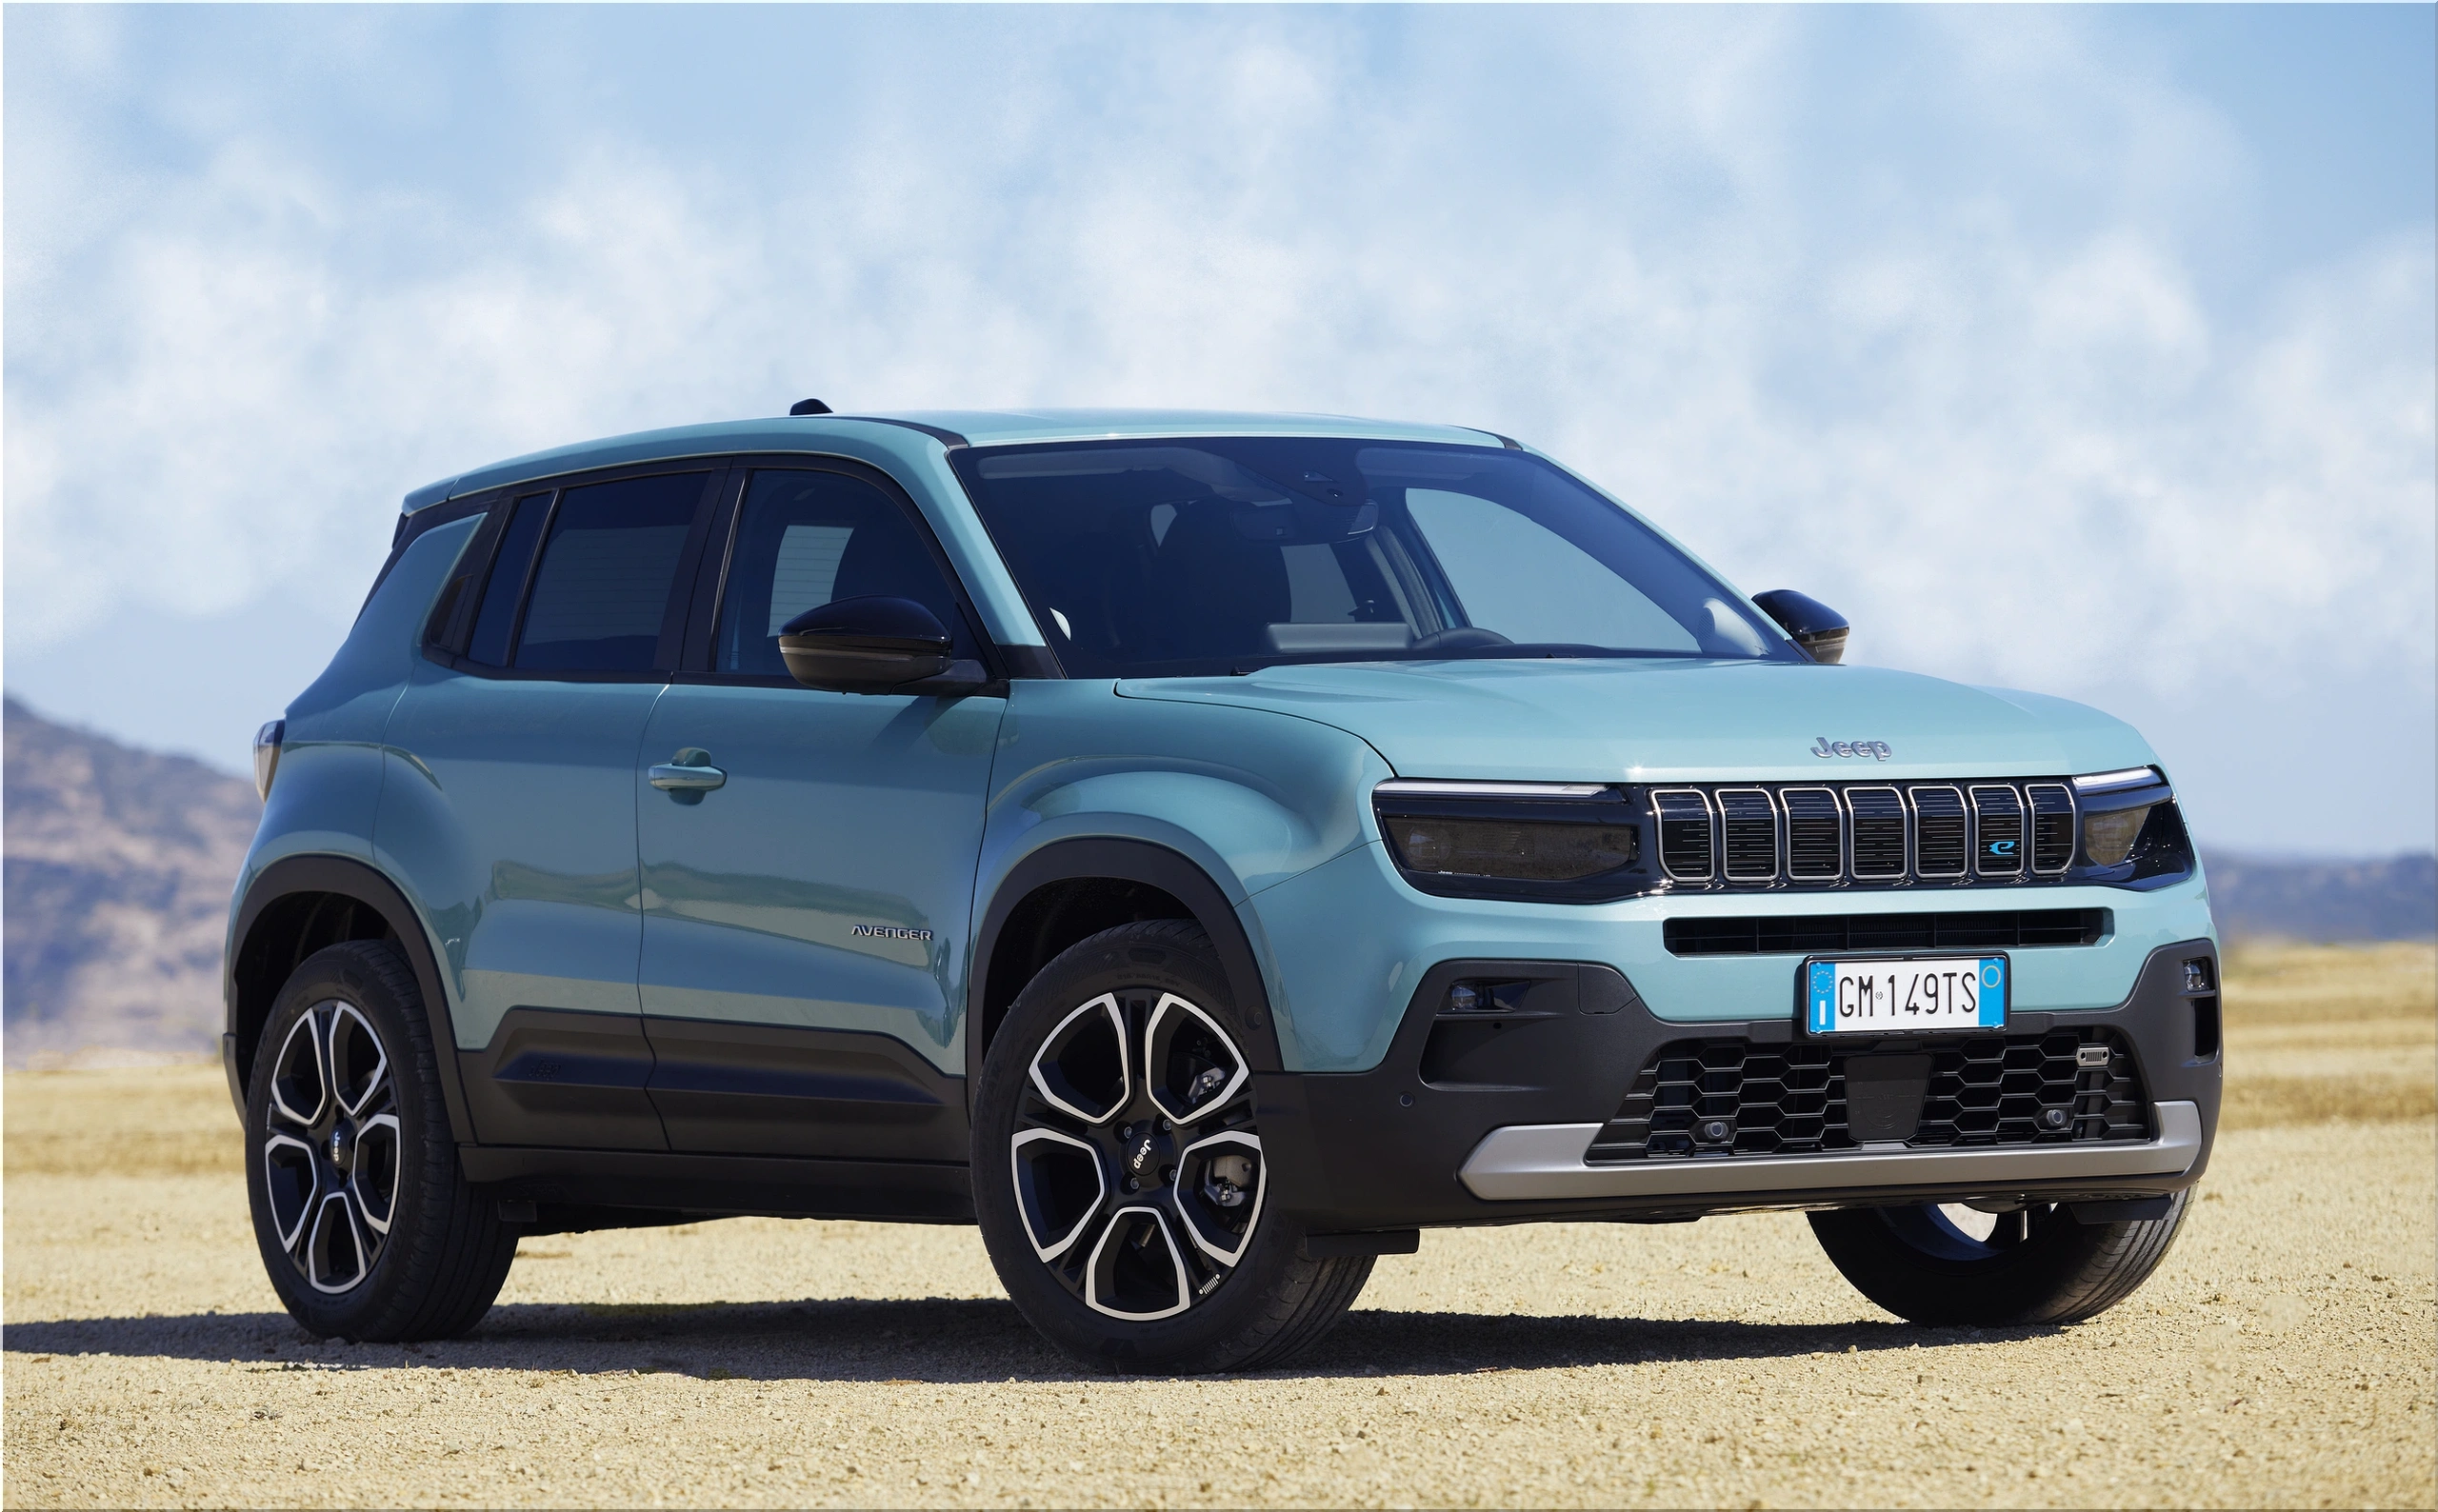 Jeep Avenger: The Electric SUV That Could Challenge Tesla